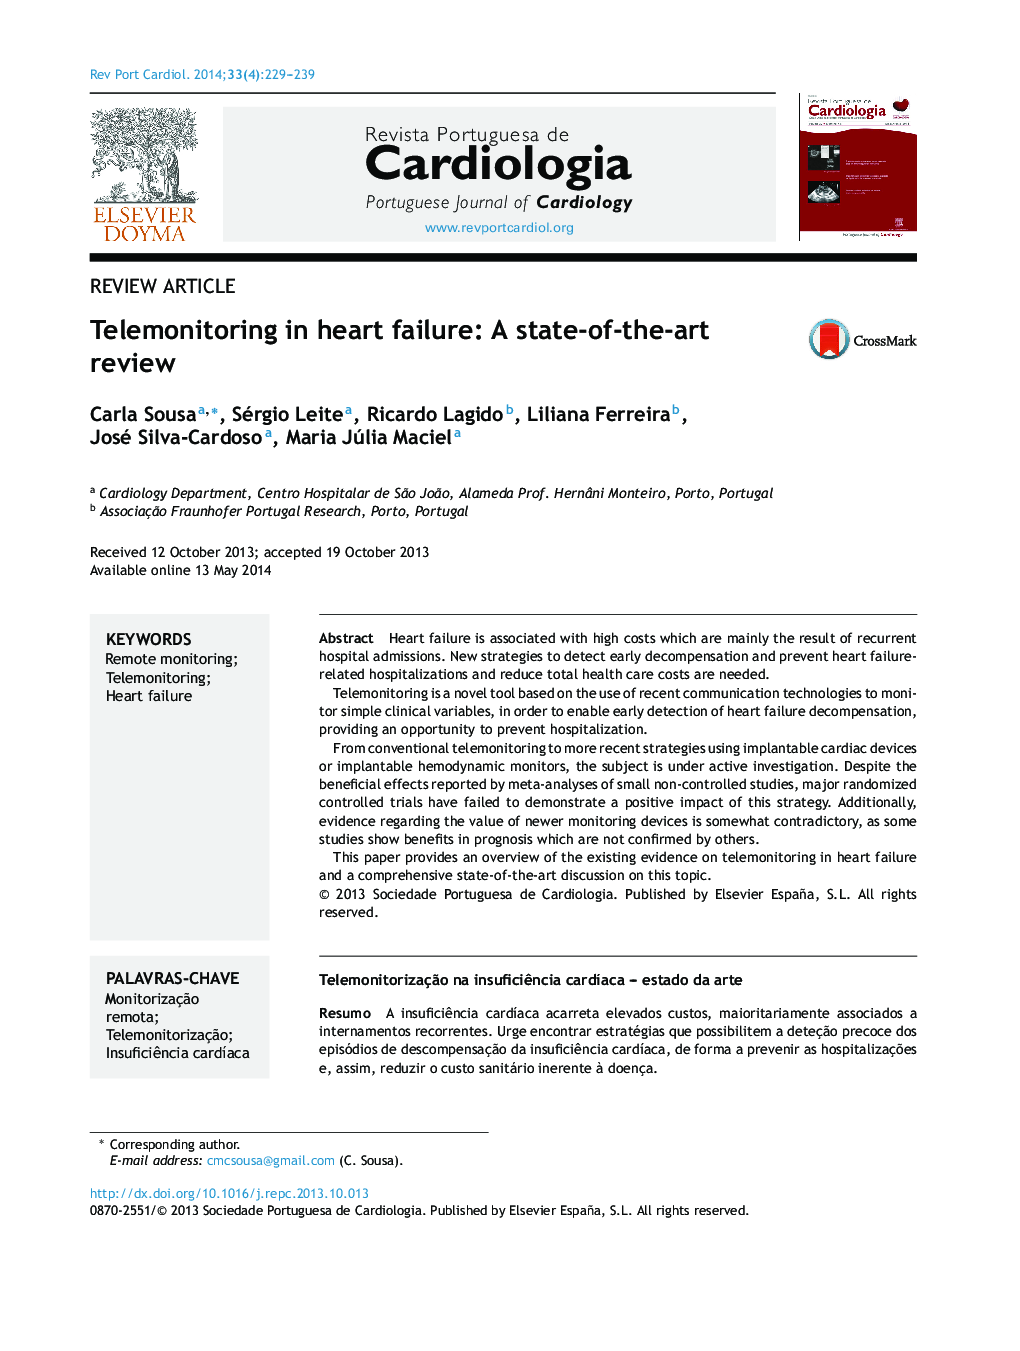 Telemonitoring in heart failure: A state-of-the-art review